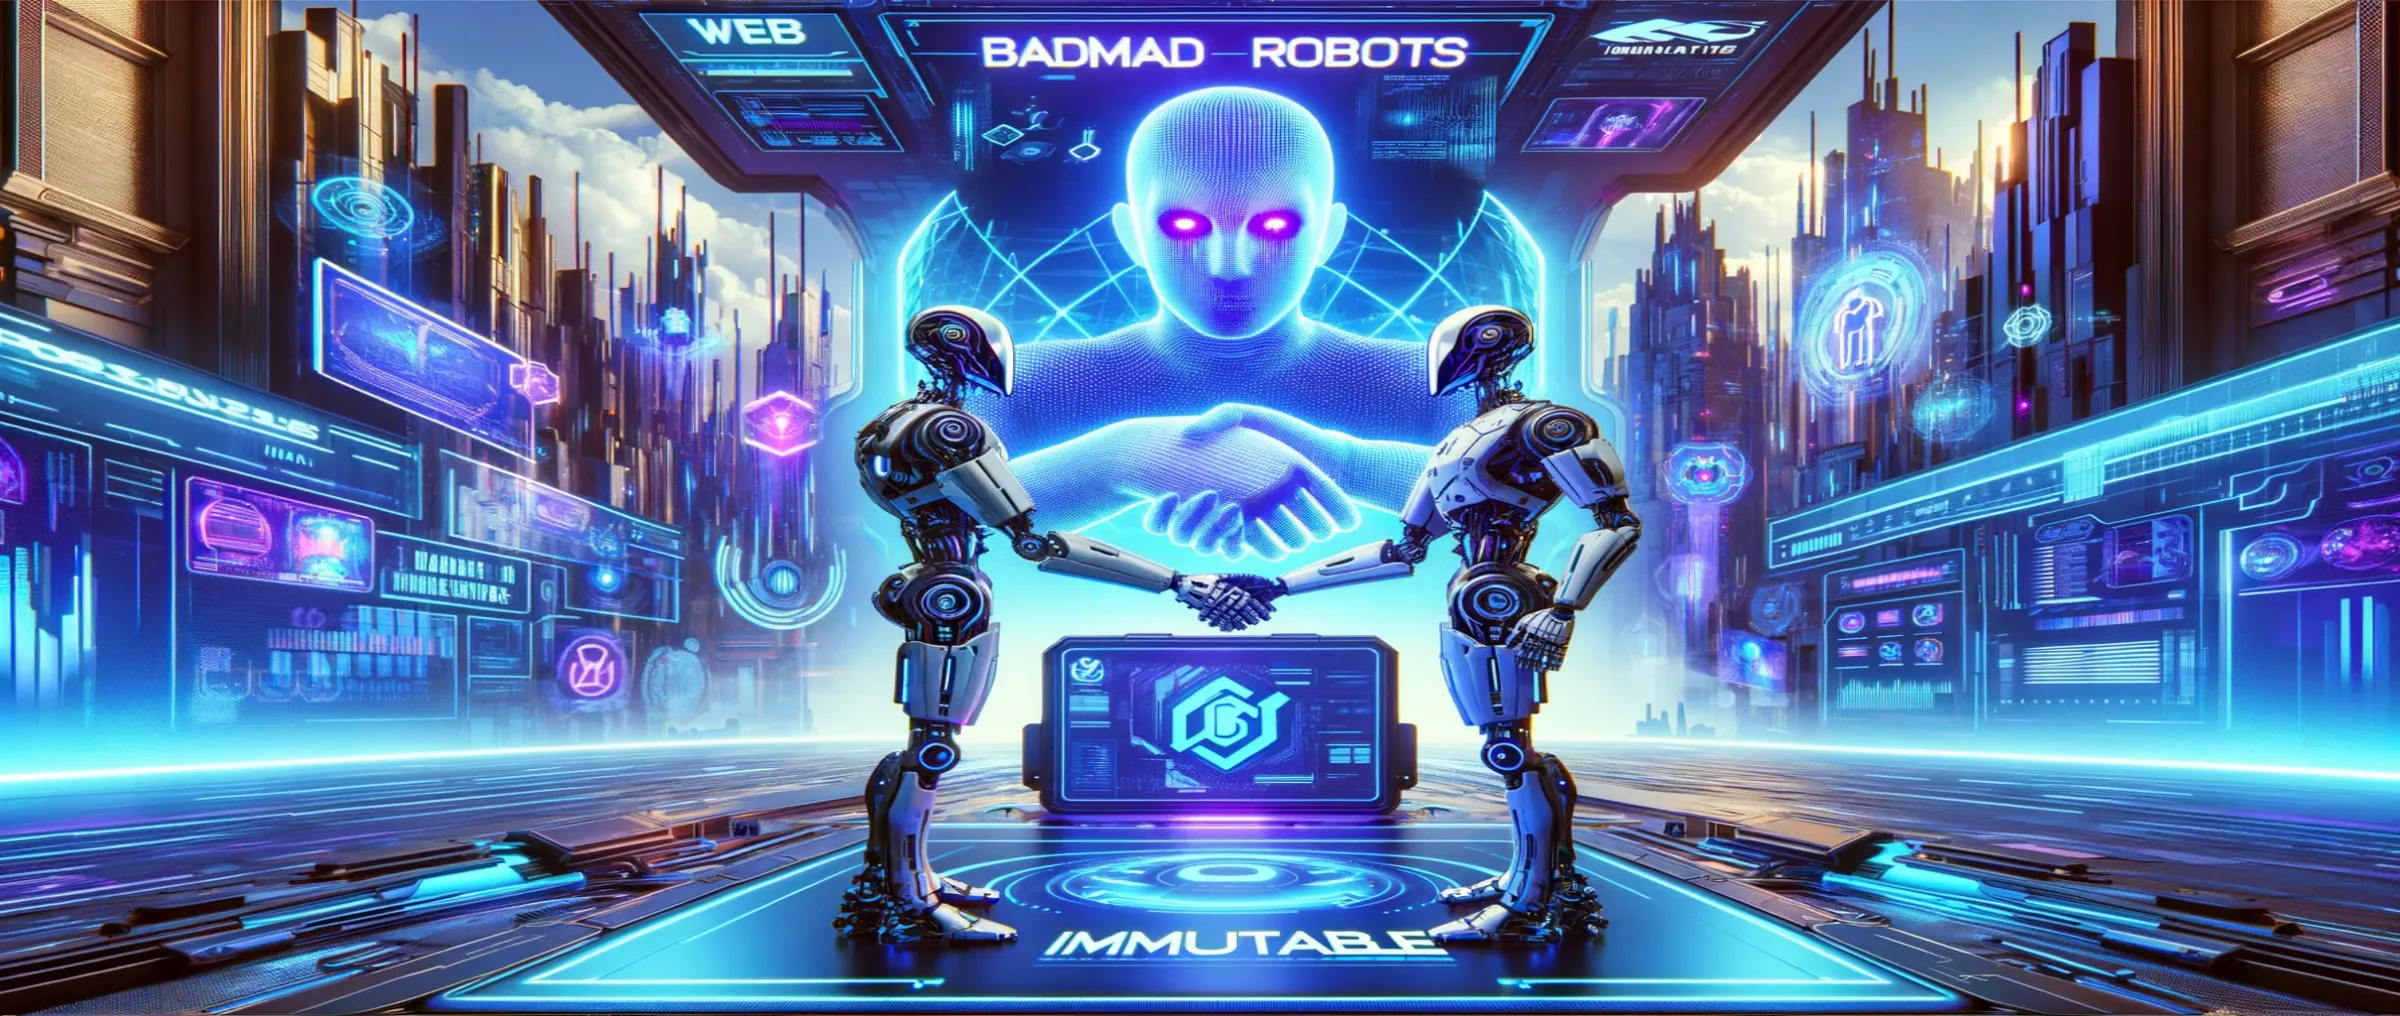 BadMad Robots Exclusively Partners with Immutable for Web3 Shooter